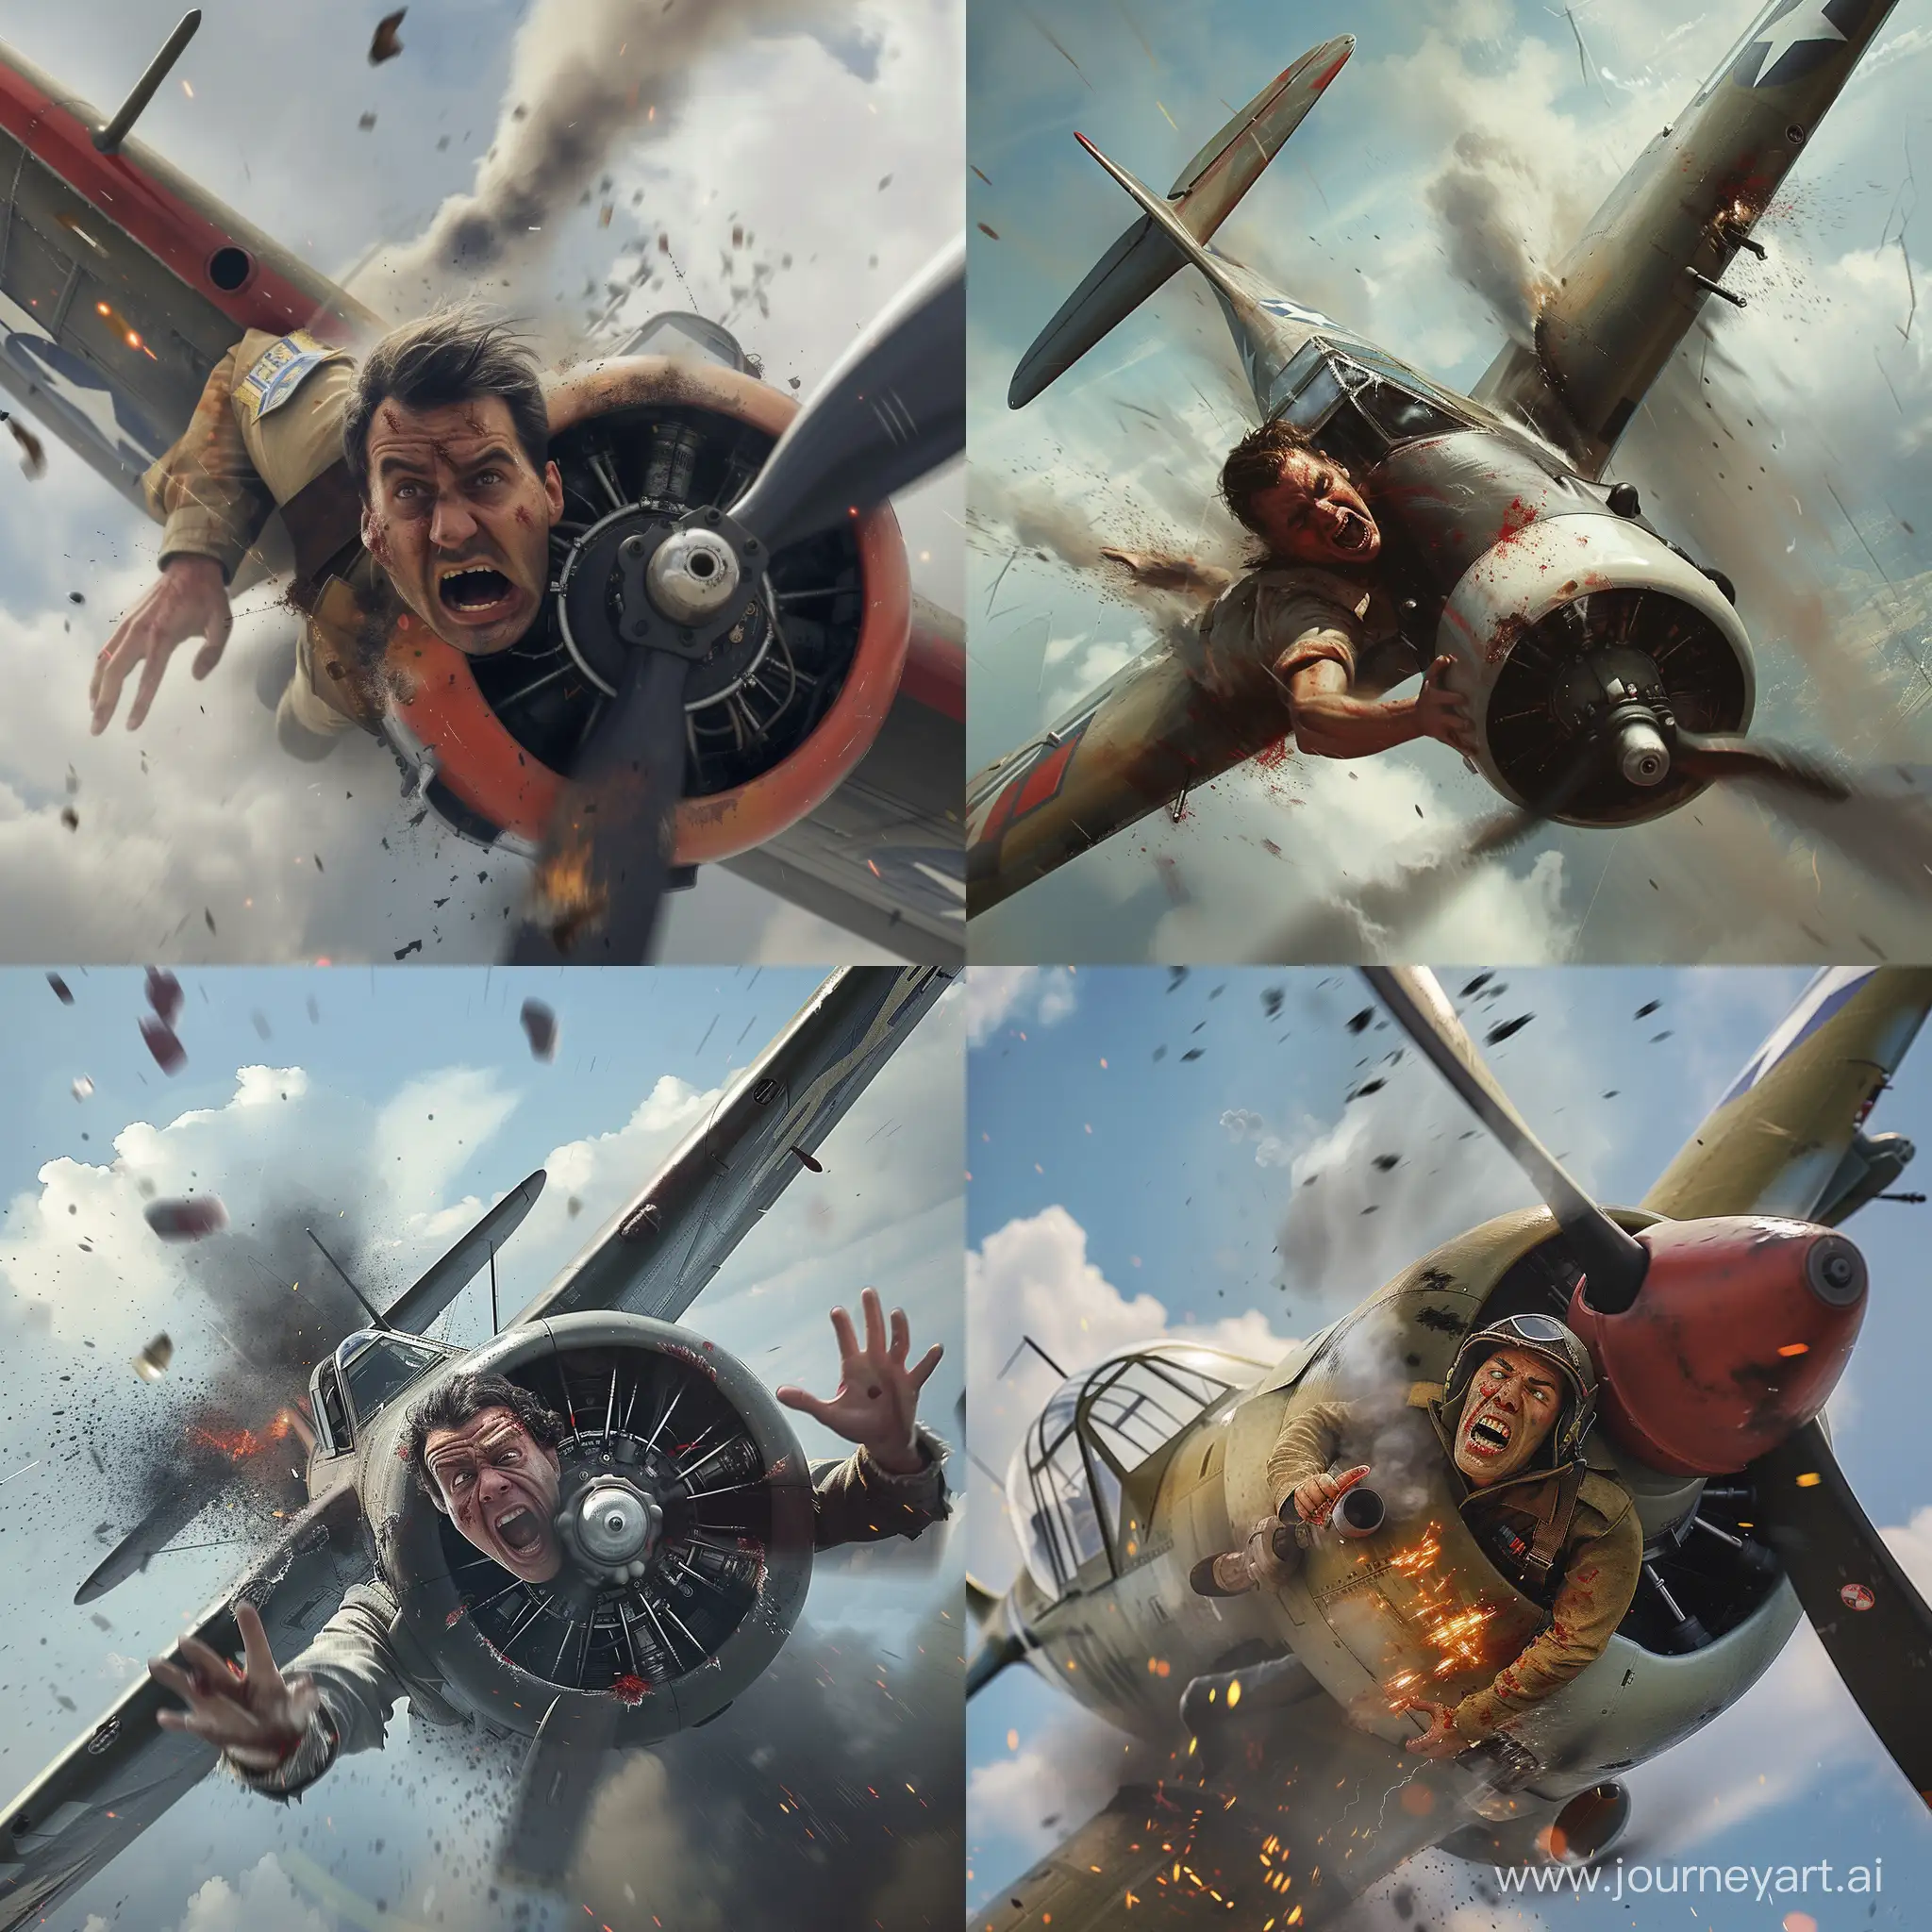 A World War II pilot falls from the sky with his plane, terrified, with realistic facial expressions and precise details, such that one of the plane’s wings is broken and smoke comes out of the plane’s engine in a realistic, dynamic cinematic scene 